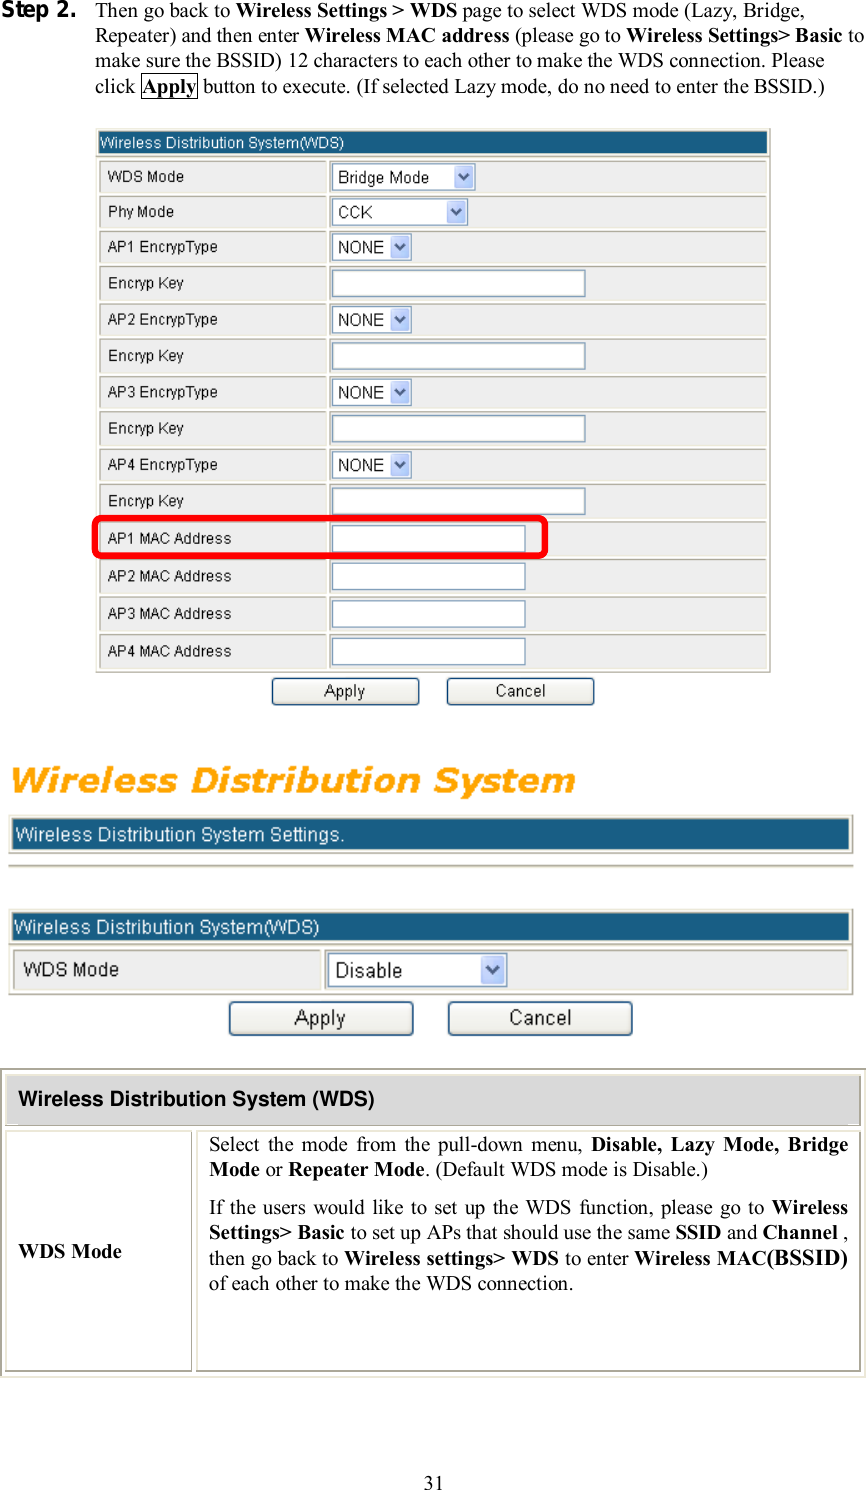    31 Step 2. Then go back to Wireless Settings &gt; WDS page to select WDS mode (Lazy, Bridge, Repeater) and then enter Wireless MAC address (please go to Wireless Settings&gt; Basic to make sure the BSSID) 12 characters to each other to make the WDS connection. Please click Apply button to execute. (If selected Lazy mode, do no need to enter the BSSID.)       Wireless Distribution System (WDS) WDS Mode Select the mode from the pull-down menu,  Disable, Lazy Mode, Bridge Mode or Repeater Mode. (Default WDS mode is Disable.) If the users would like to set up the WDS function, please go to  Wireless Settings&gt; Basic to set up APs that should use the same SSID and Channel , then go back to Wireless settings&gt; WDS to enter Wireless MAC(BSSID) of each other to make the WDS connection.    